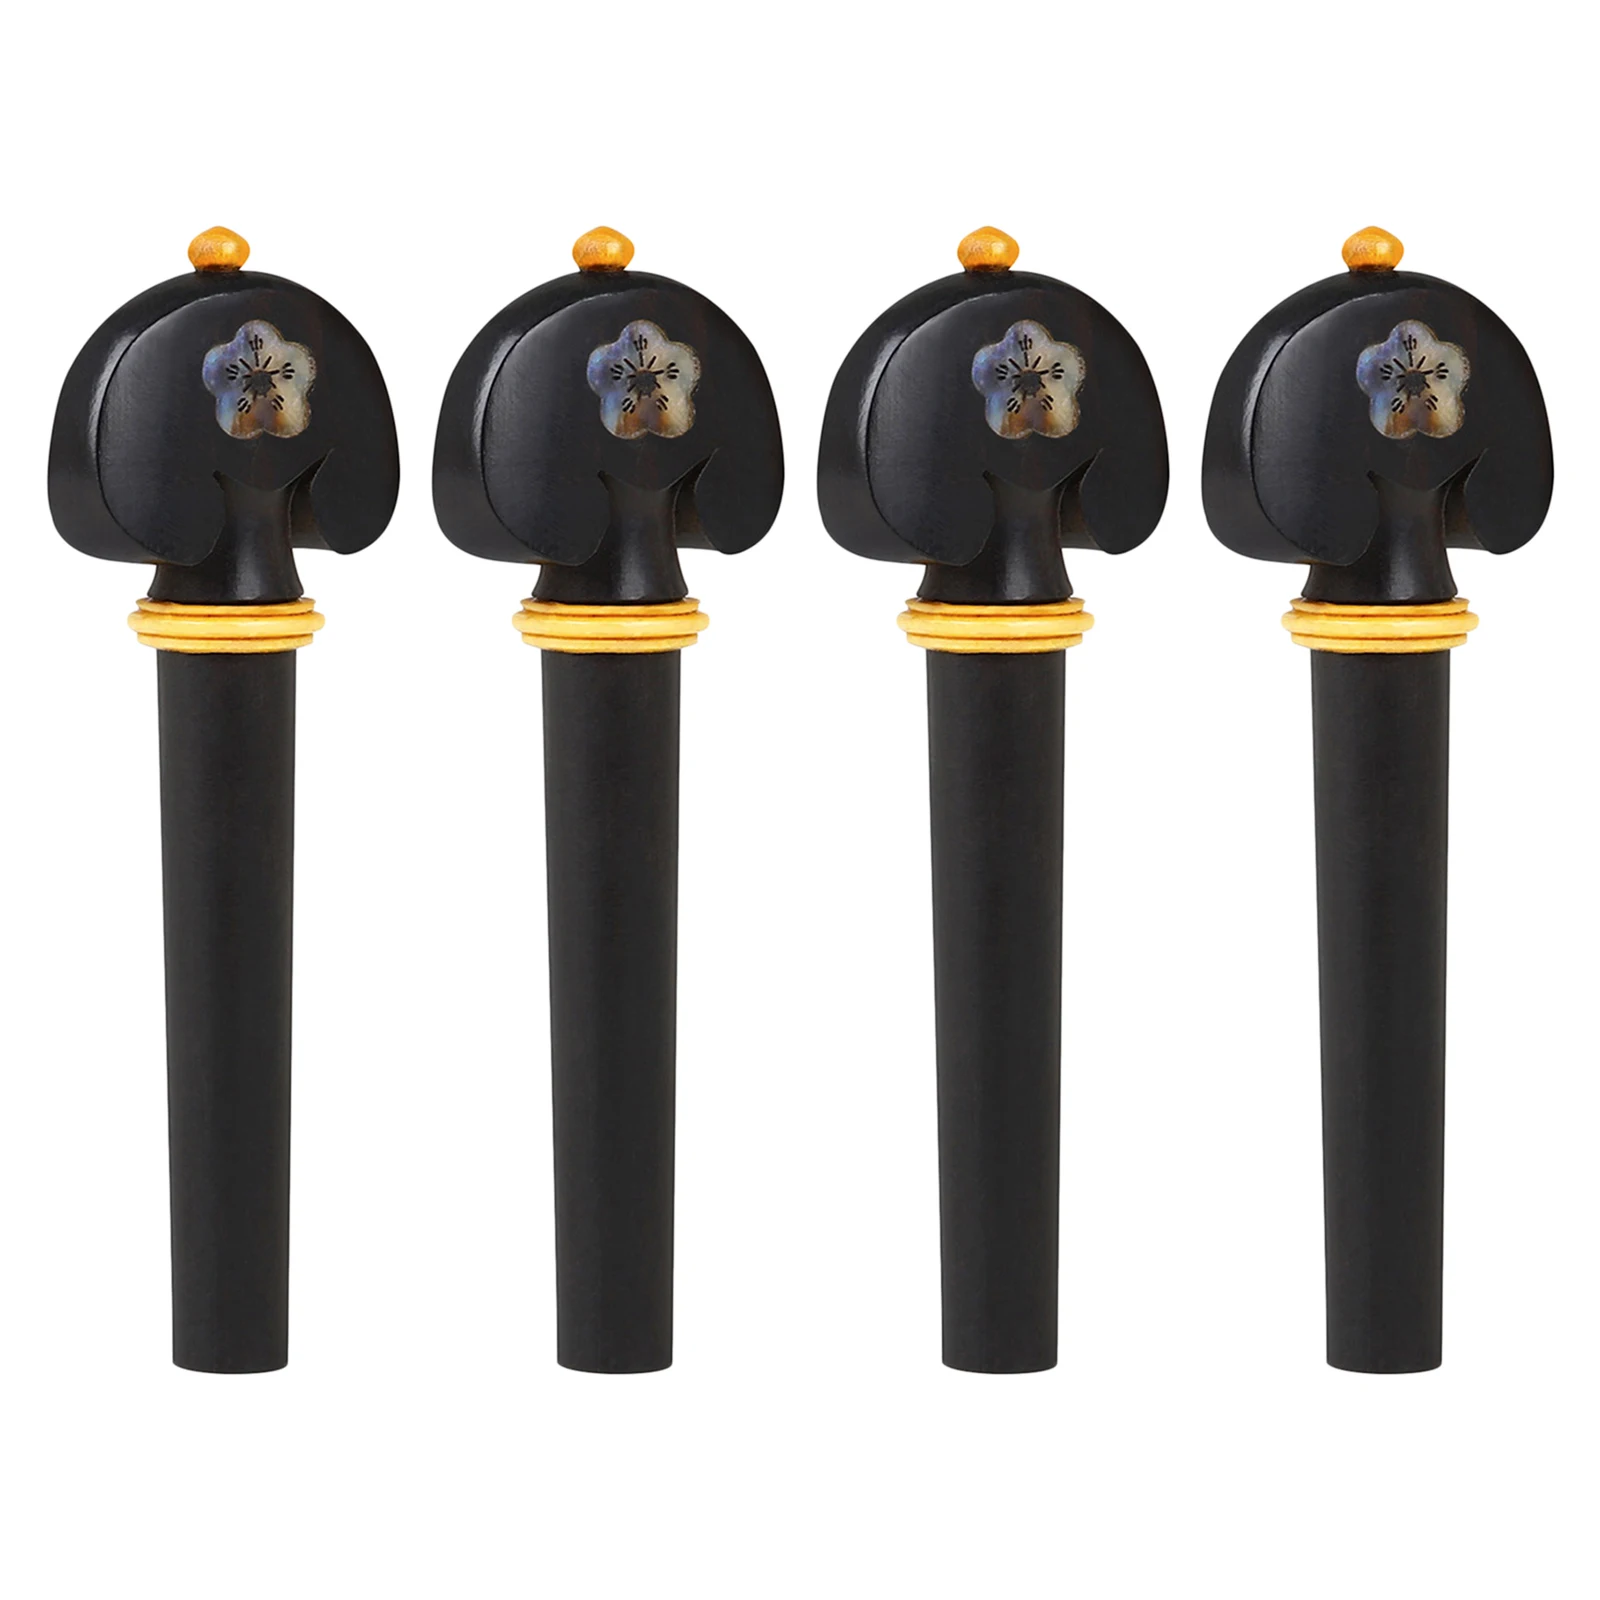 4x Ebony 3/4 4/4 Violin Tuning Pegs Wooden String Instrument Accessories Ukulele Classical Acoustic Guitar Tuning Pegs